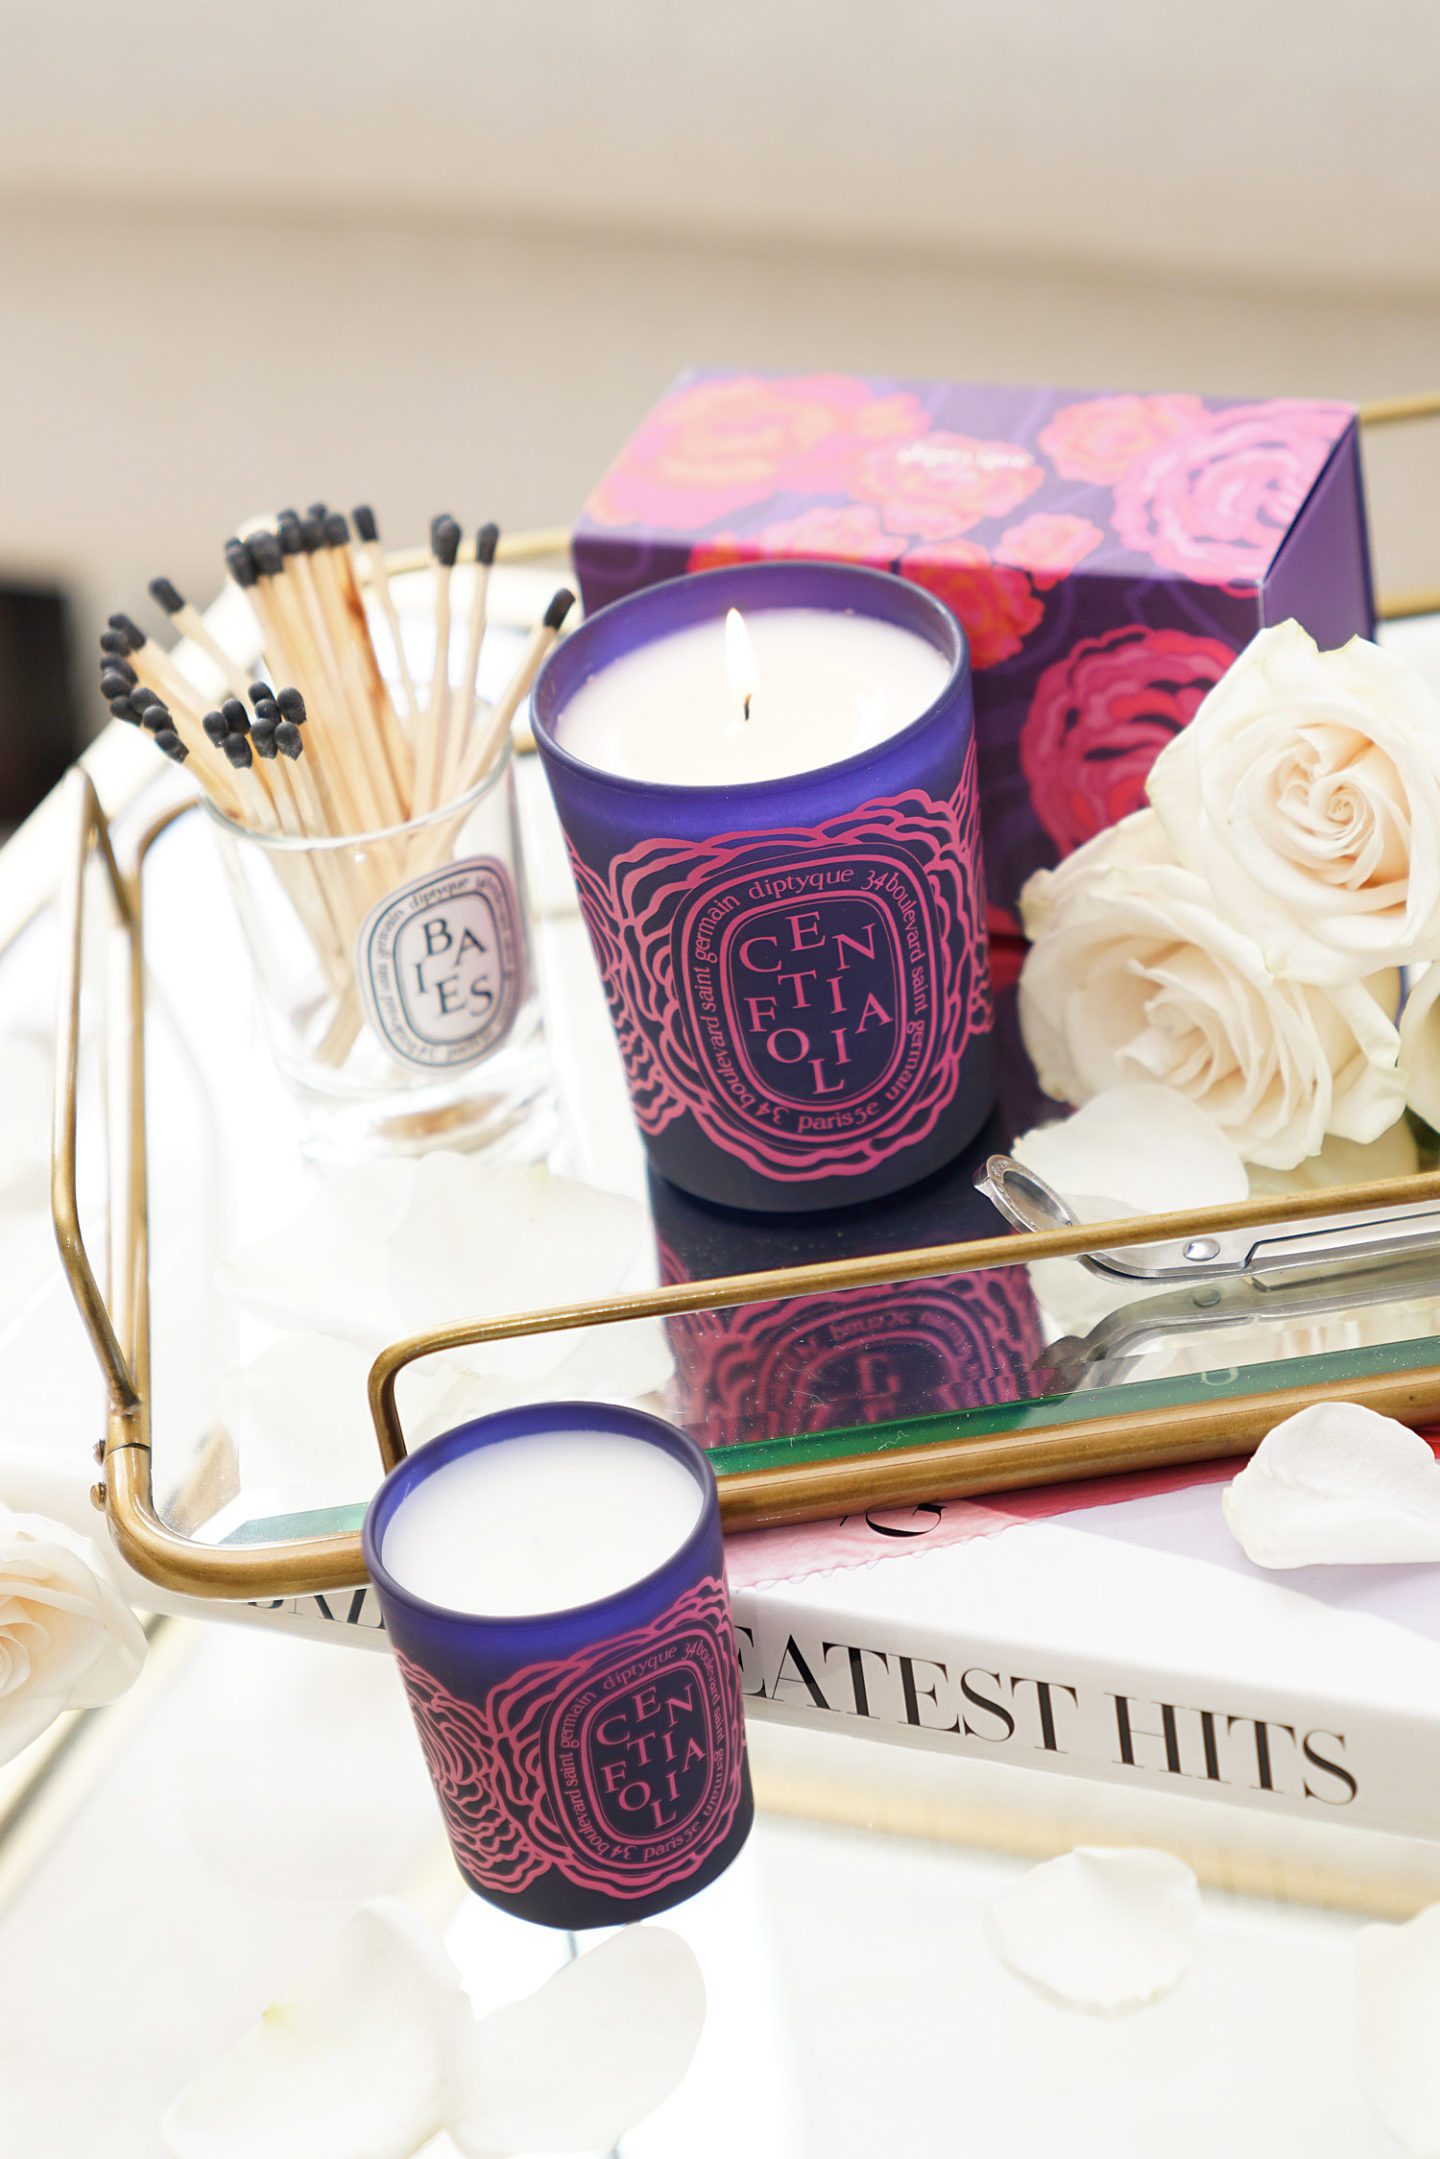 The Beauty Look Book Diptyque Valentine's Day Roses Candles Centifolia Review